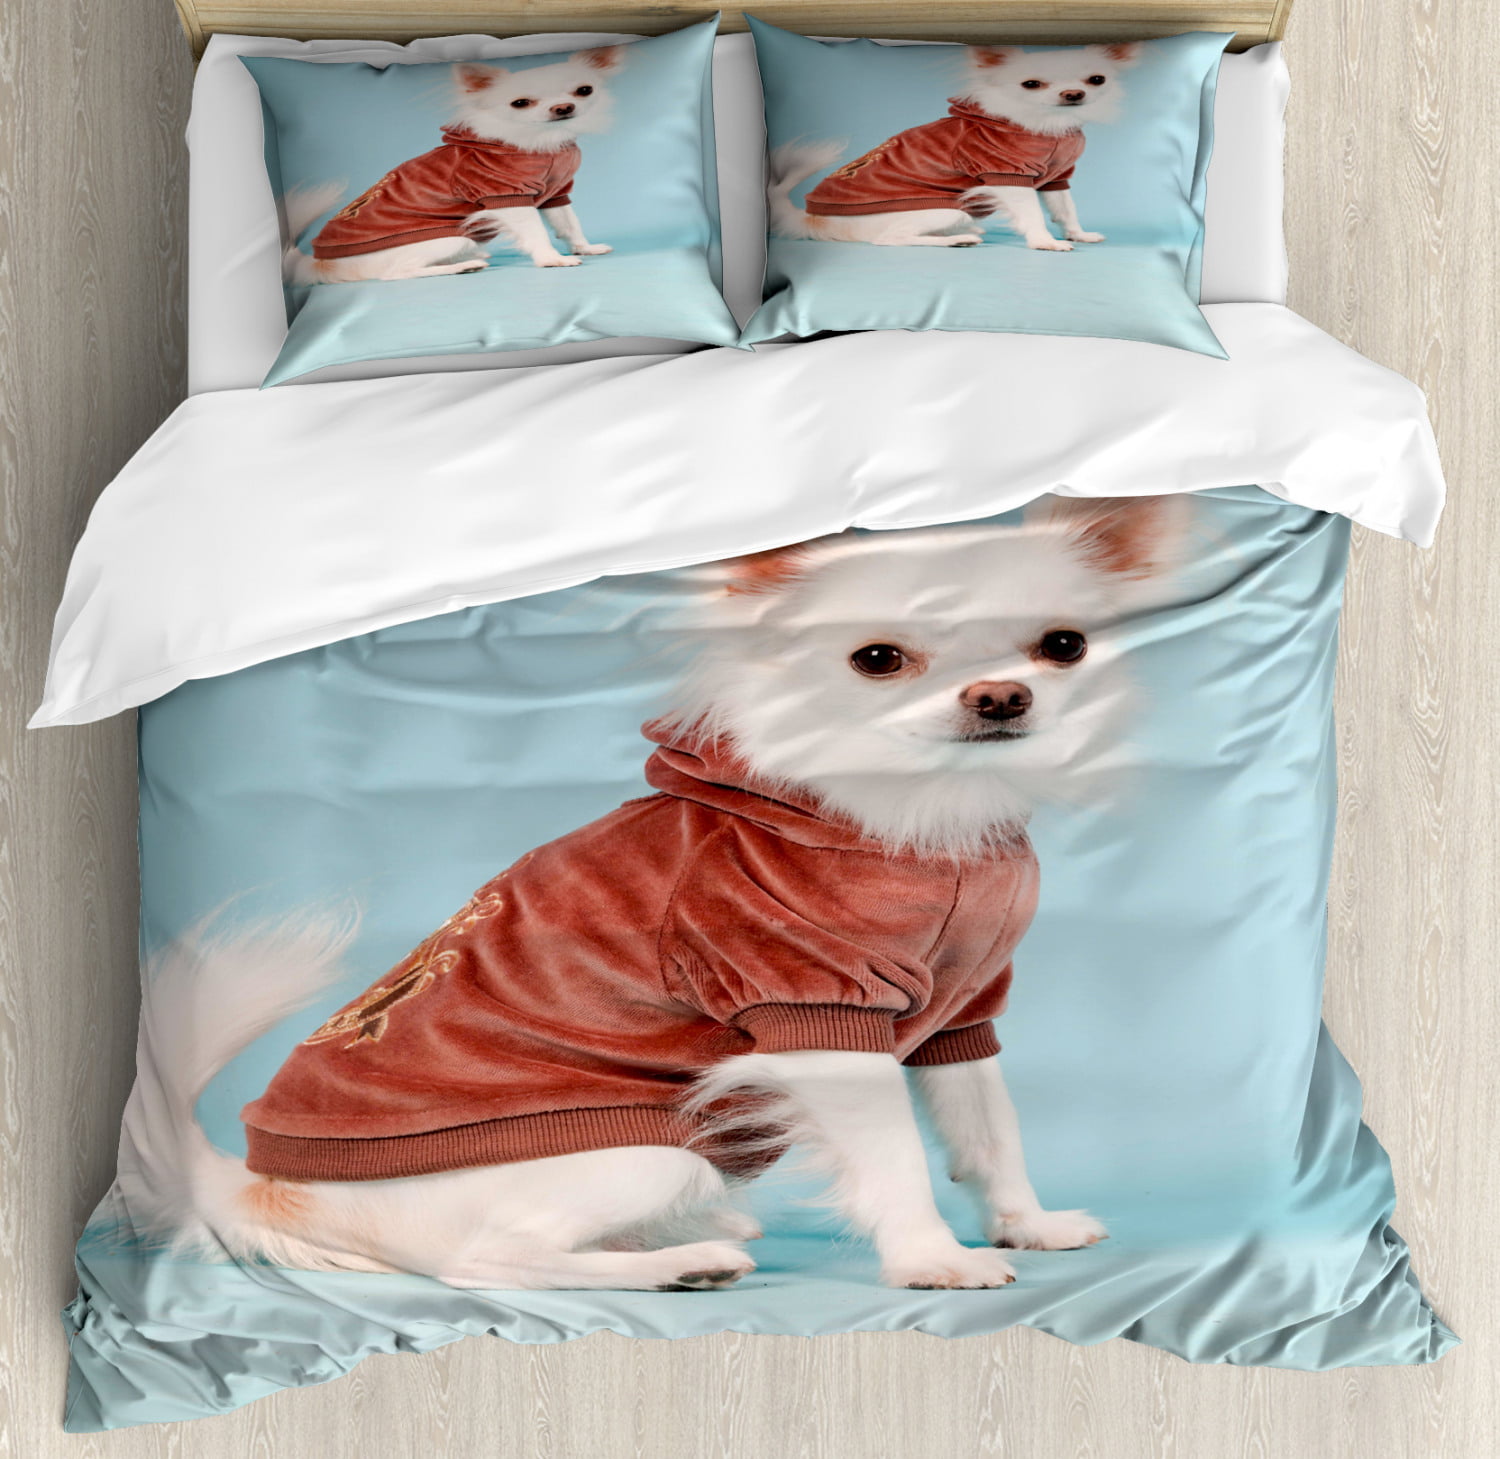 Chihuahua Duvet Cover Set Studio Portrait Of Puppy With Clothes